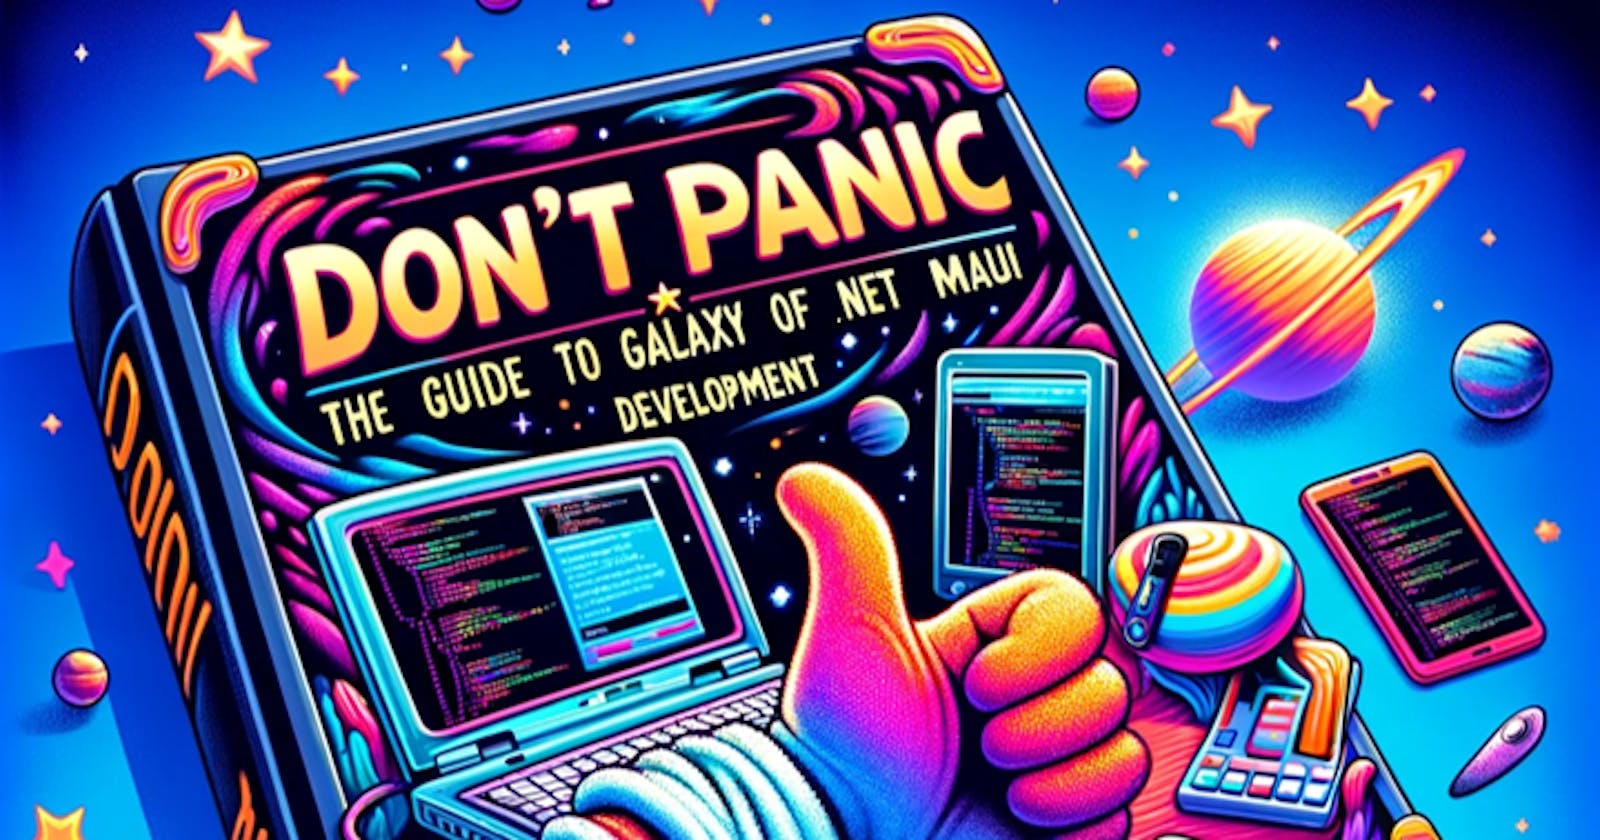 Don't Panic – The Guide to the Galaxy of .NET MAUI Development